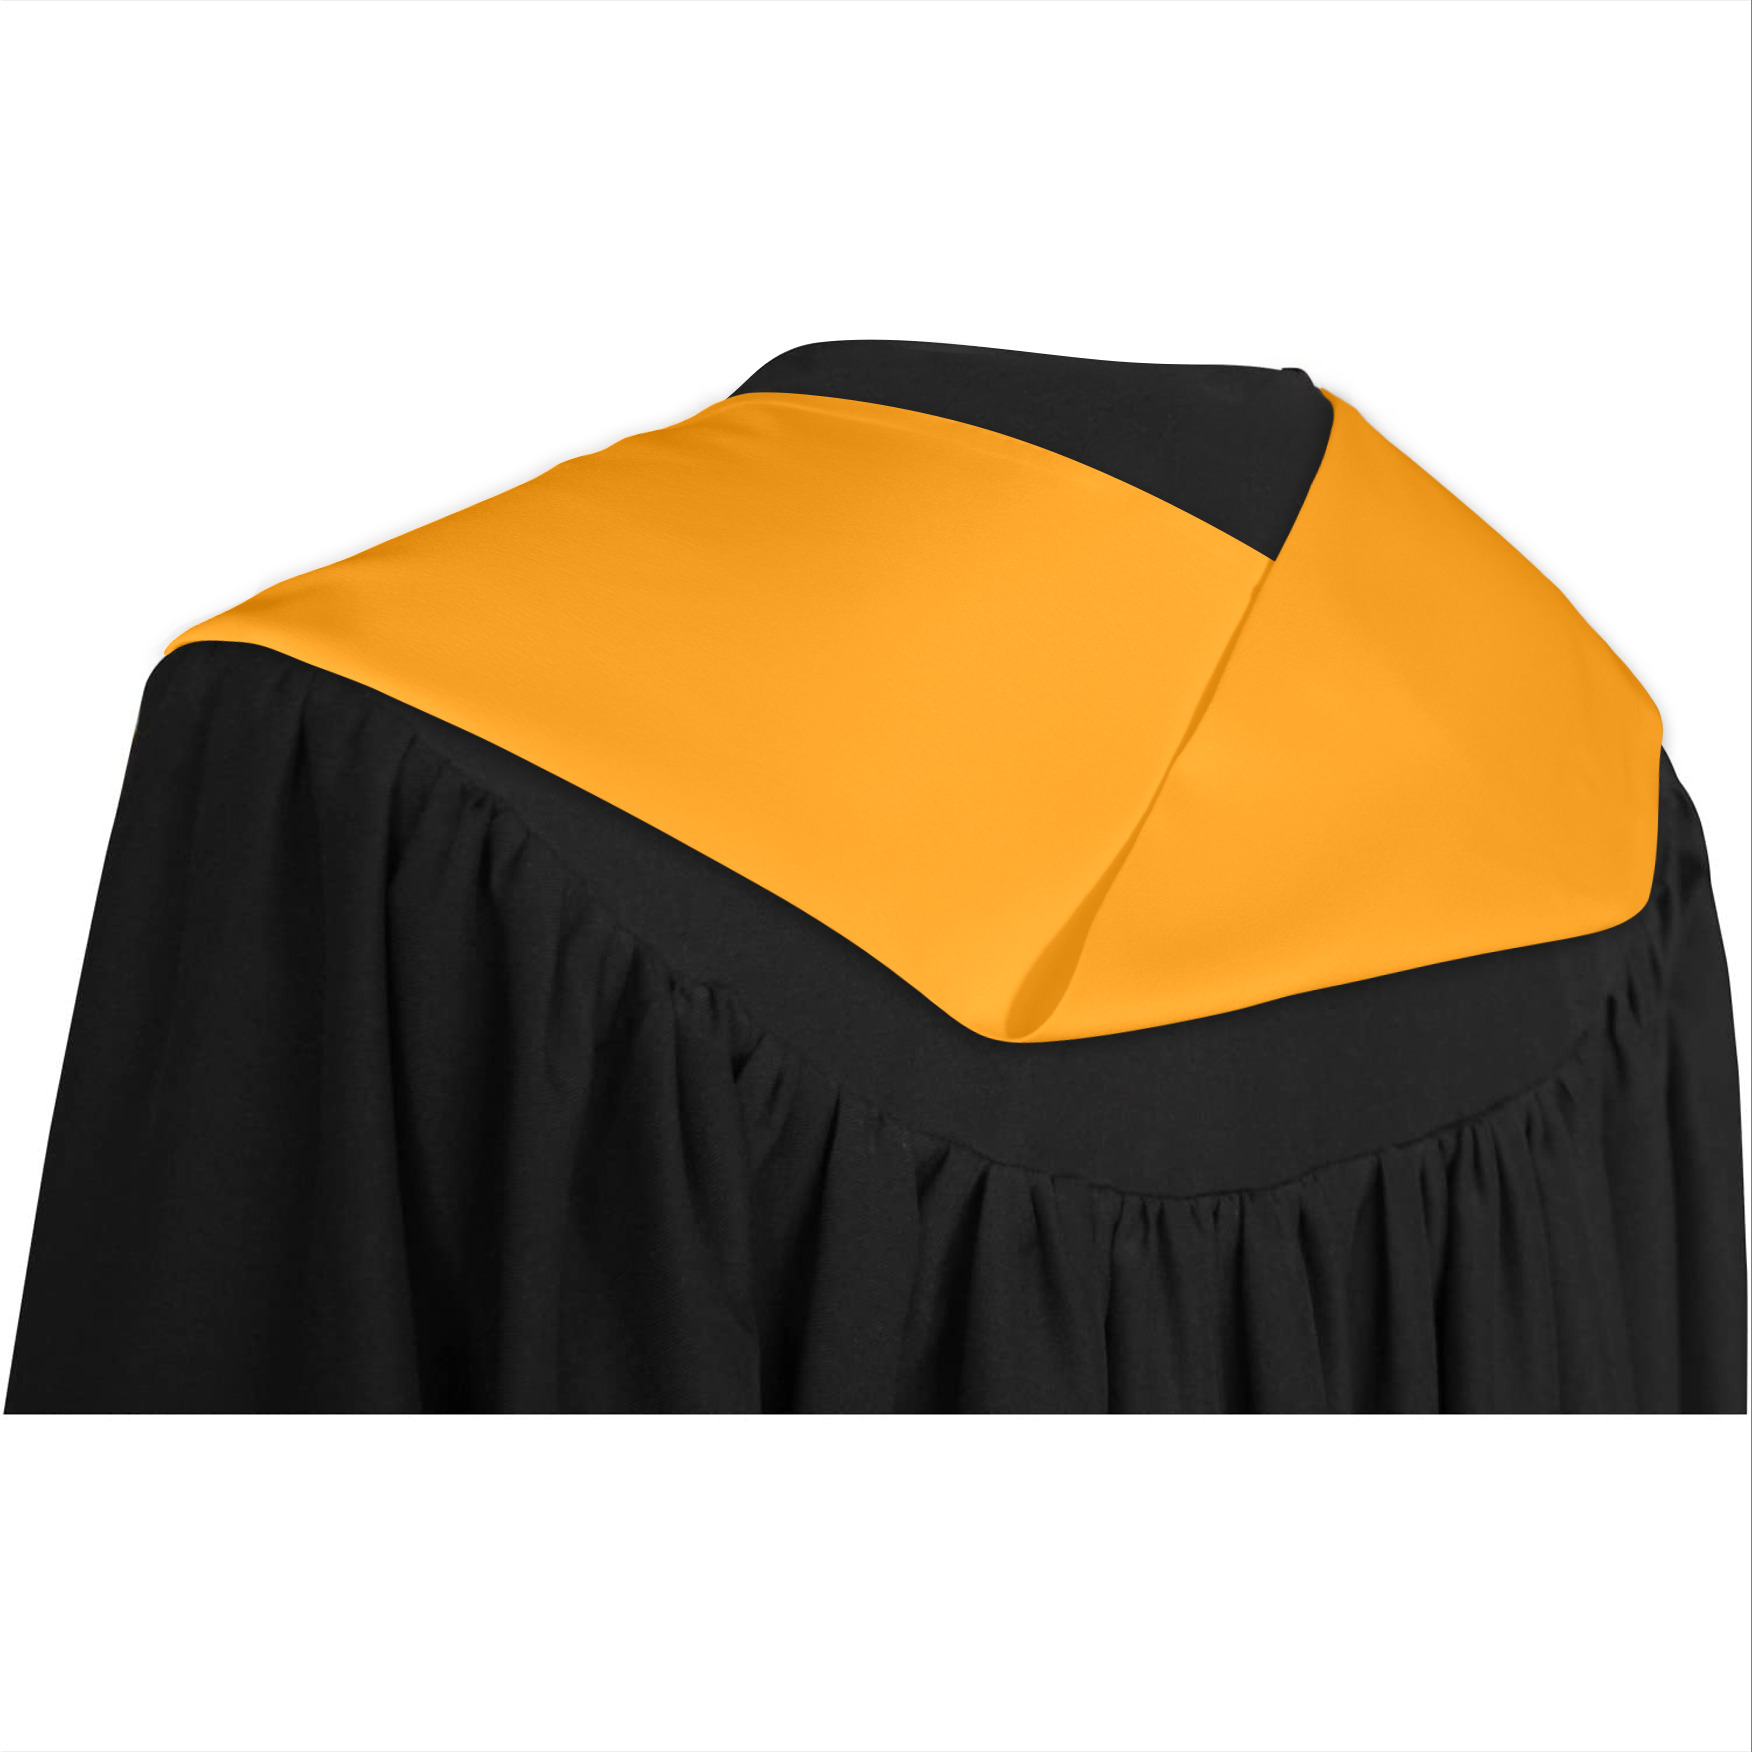 Sargon gold and the flag Graduation Stole